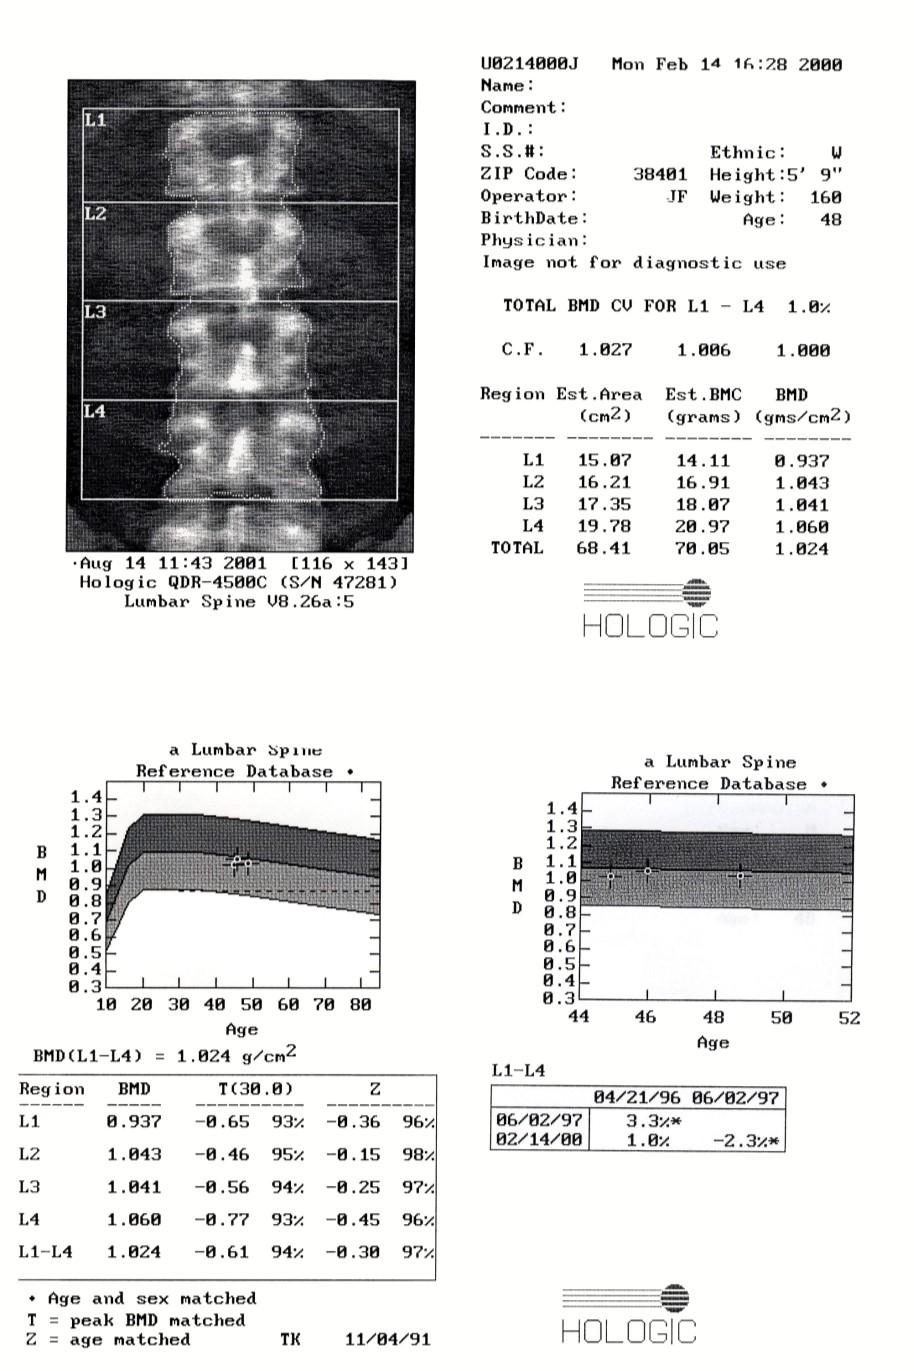 Contraindication for DXA body composition includes pregnancy, exceeding the scanner weight limits, and recent administration of contrast material.